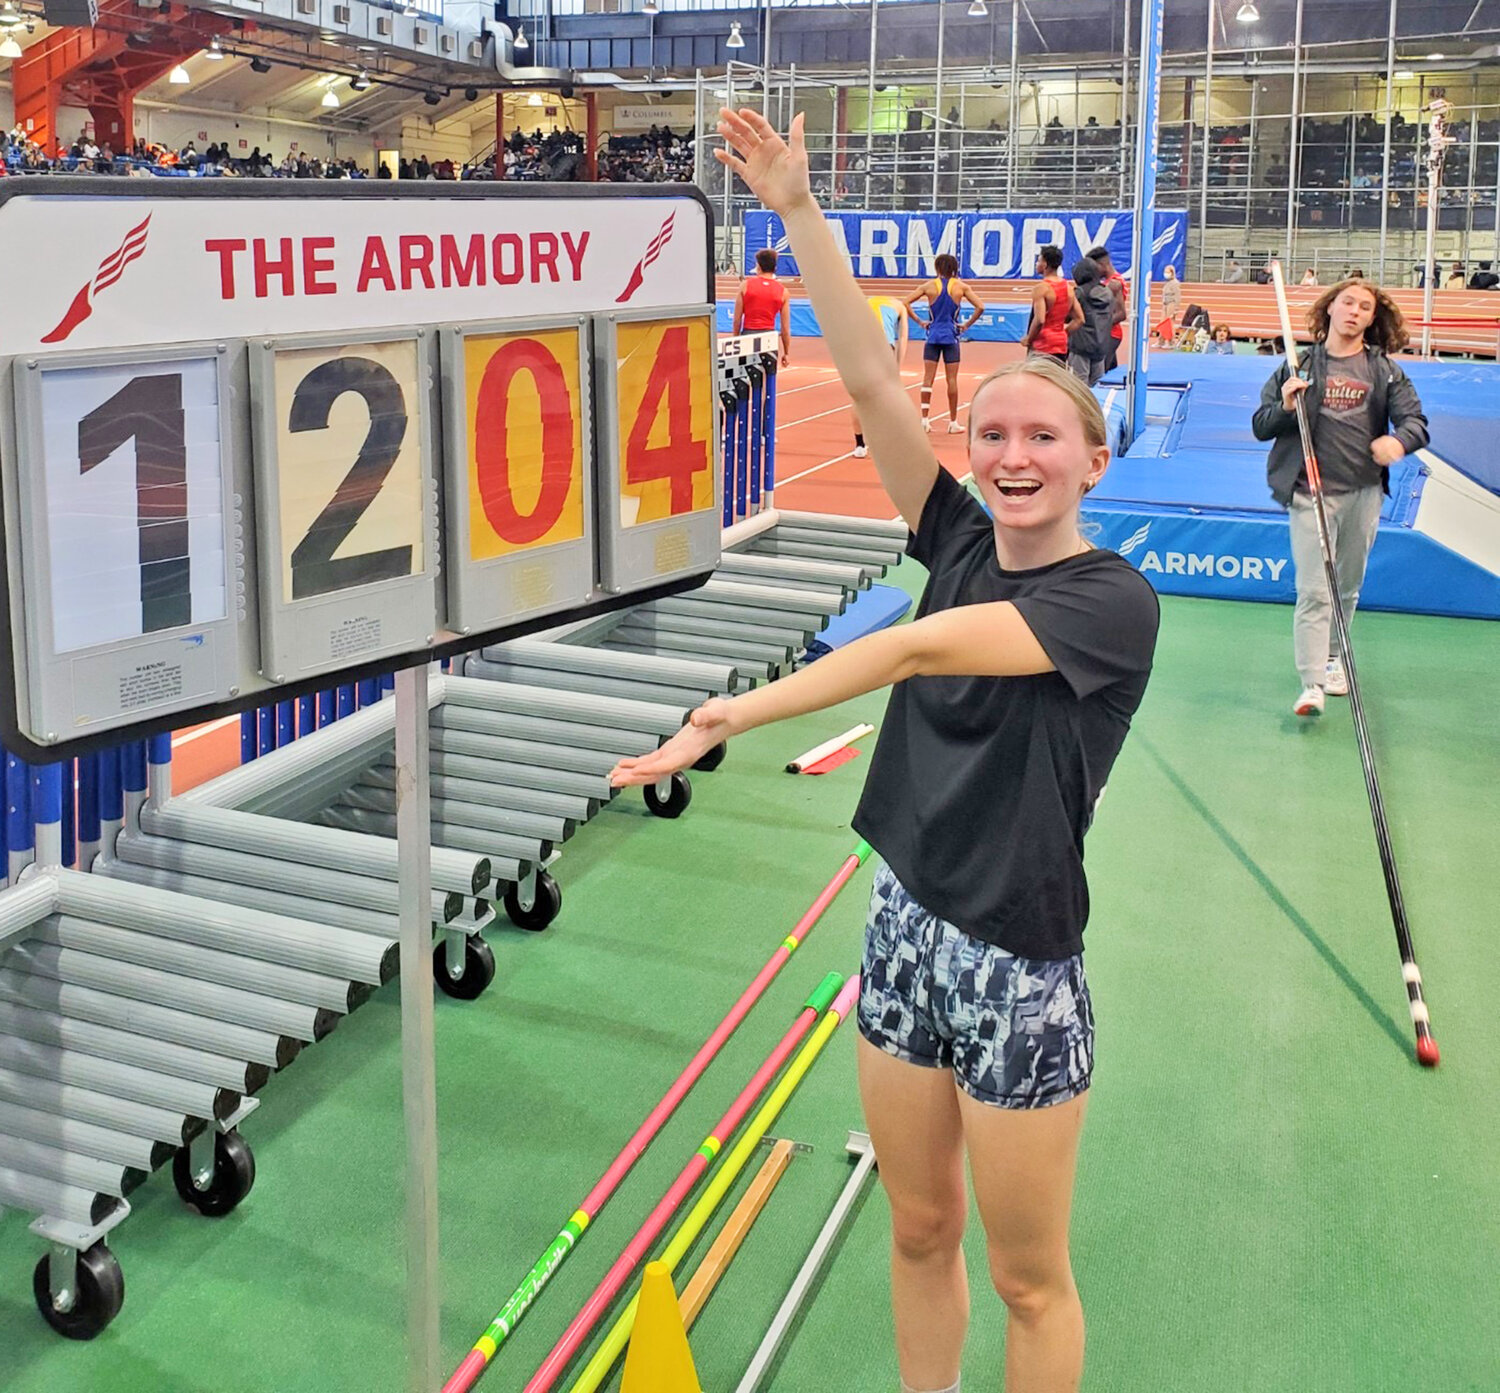 Herkimer Central School senior Melia Couchman celebrates after winning the championship in the girls pole vault emerging elite category at the Nike Indoor Nationals.